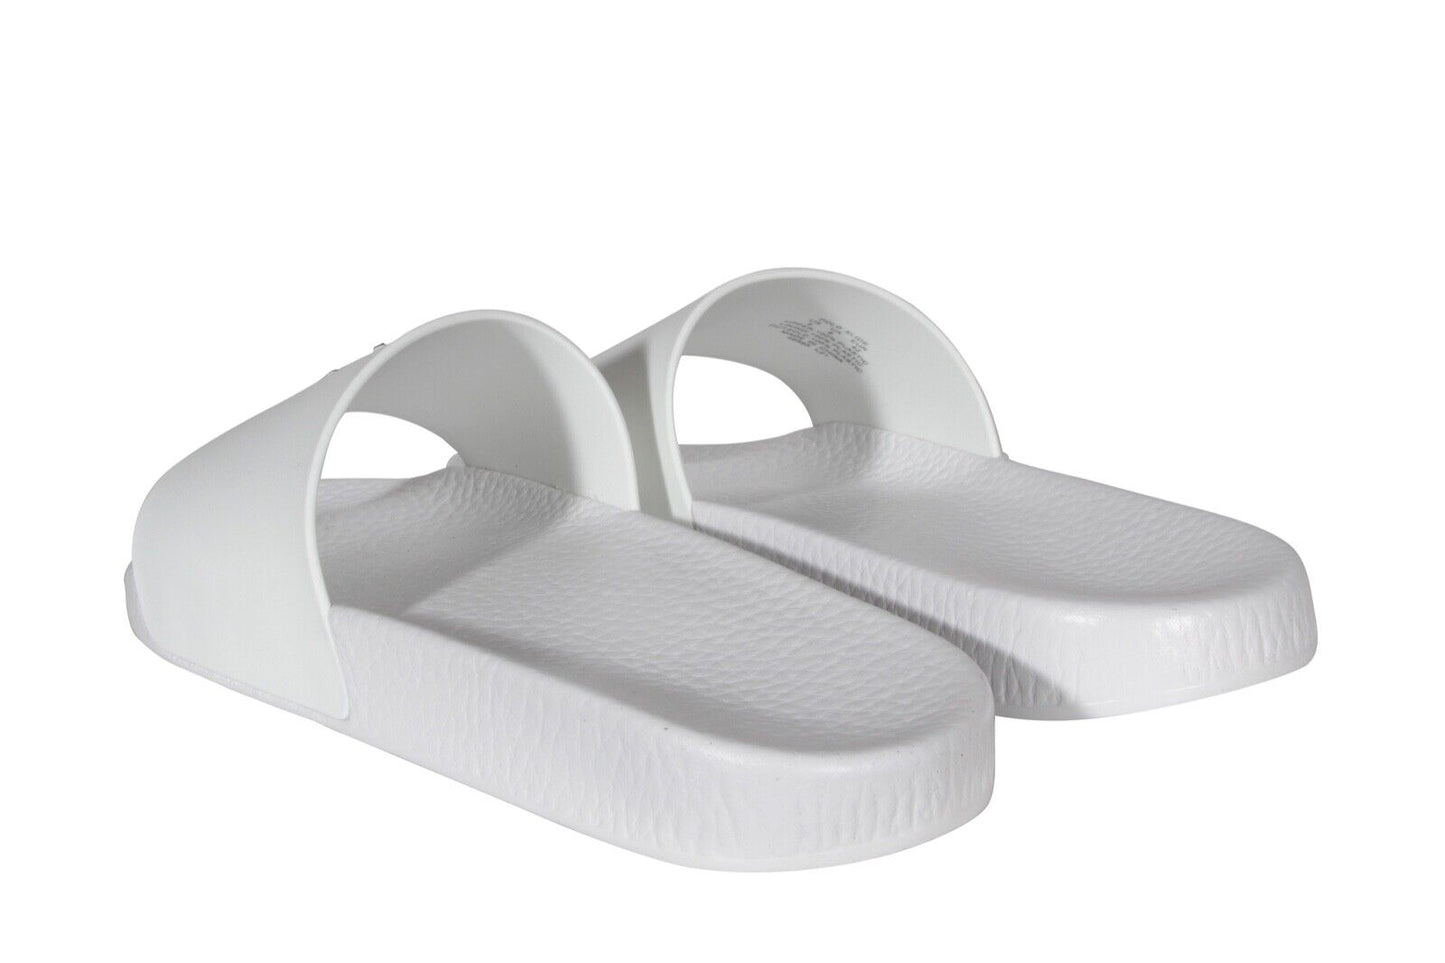 Polo Ralph Lauren Signature Pony Slide in White and Navy Blue 809852071001